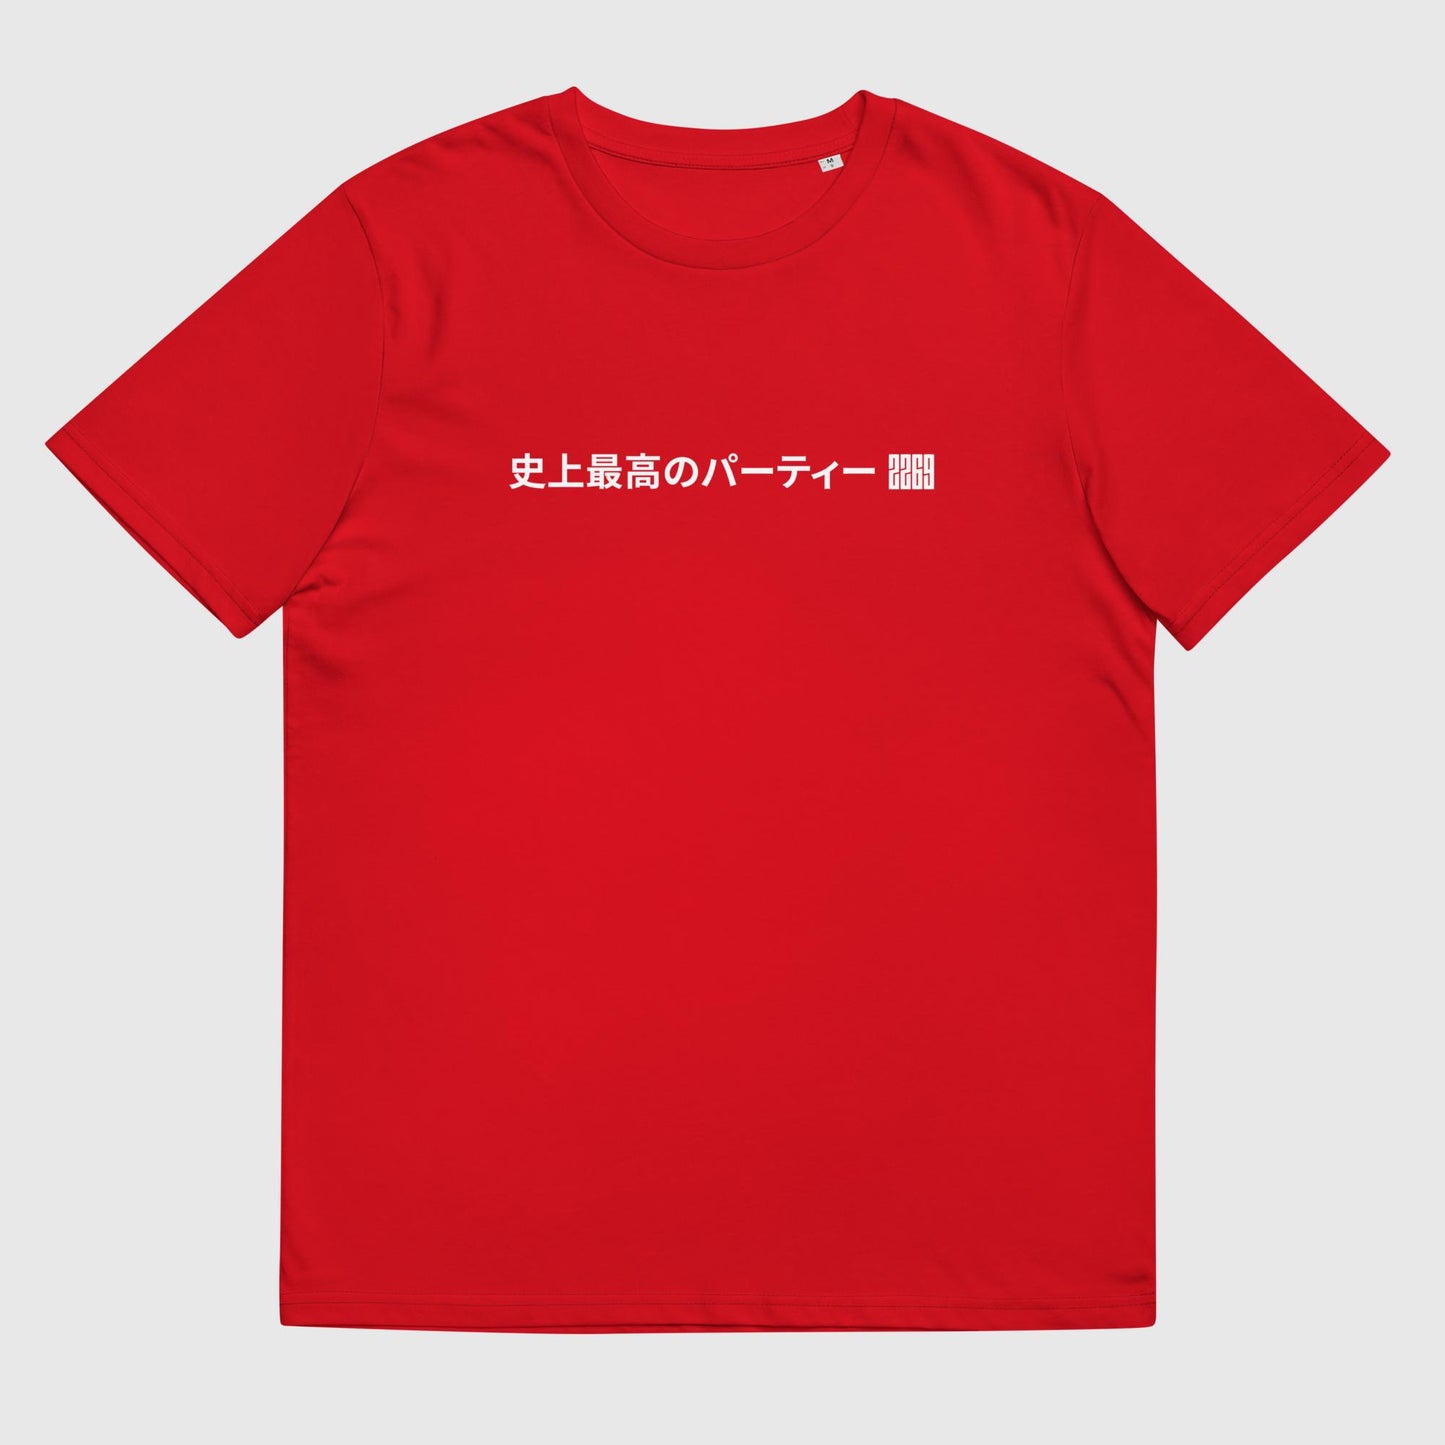 Men's red organic cotton t-shirt with Japanese 2269 party message